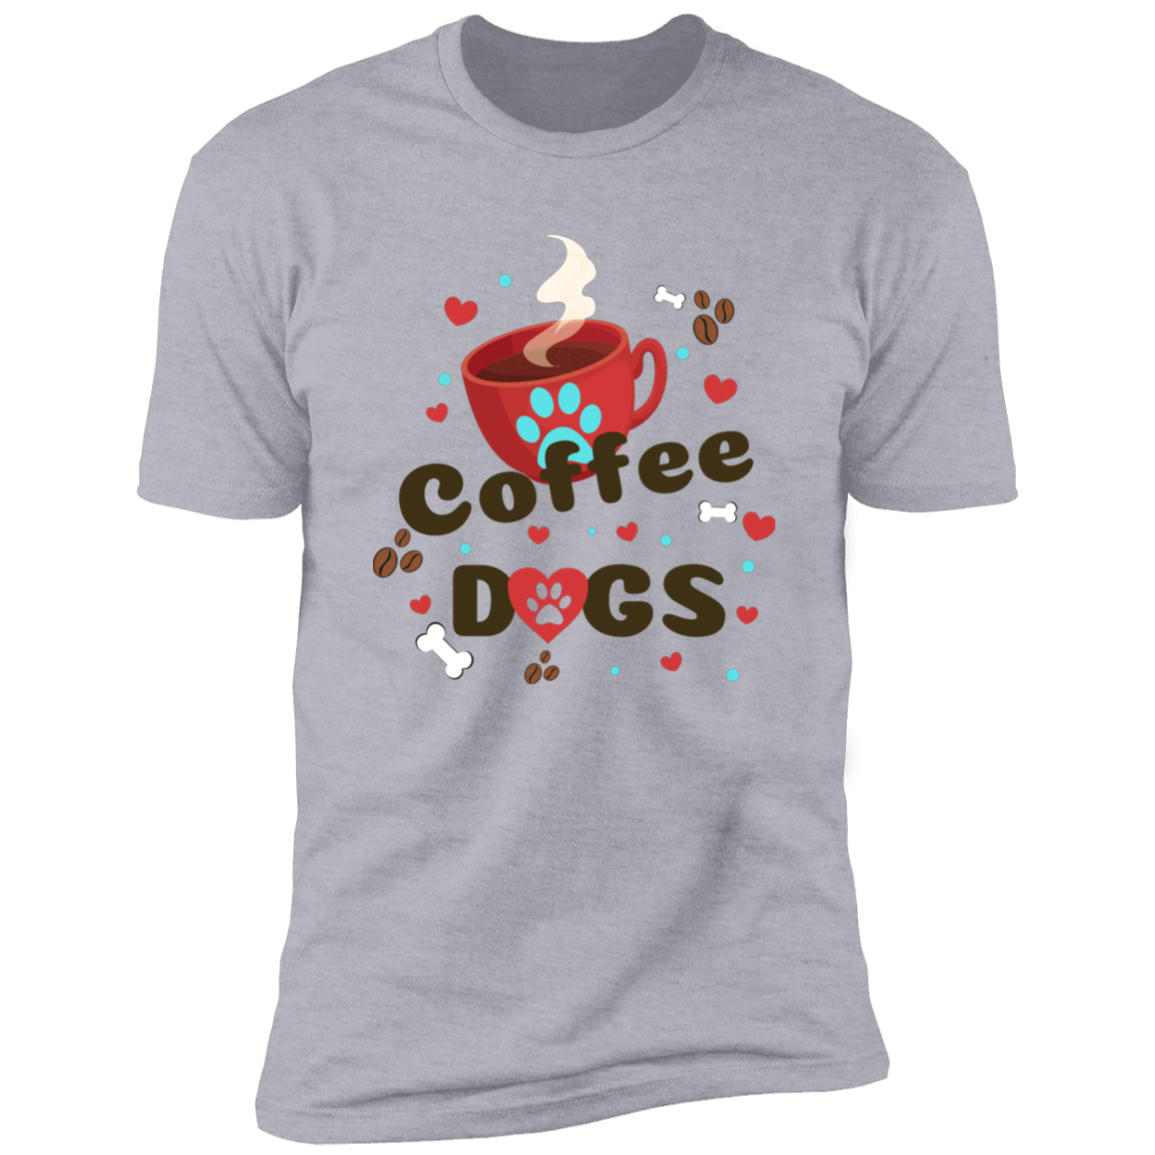 Coffee Dogs T-shirt, Dog Shirt for humans, in light blue